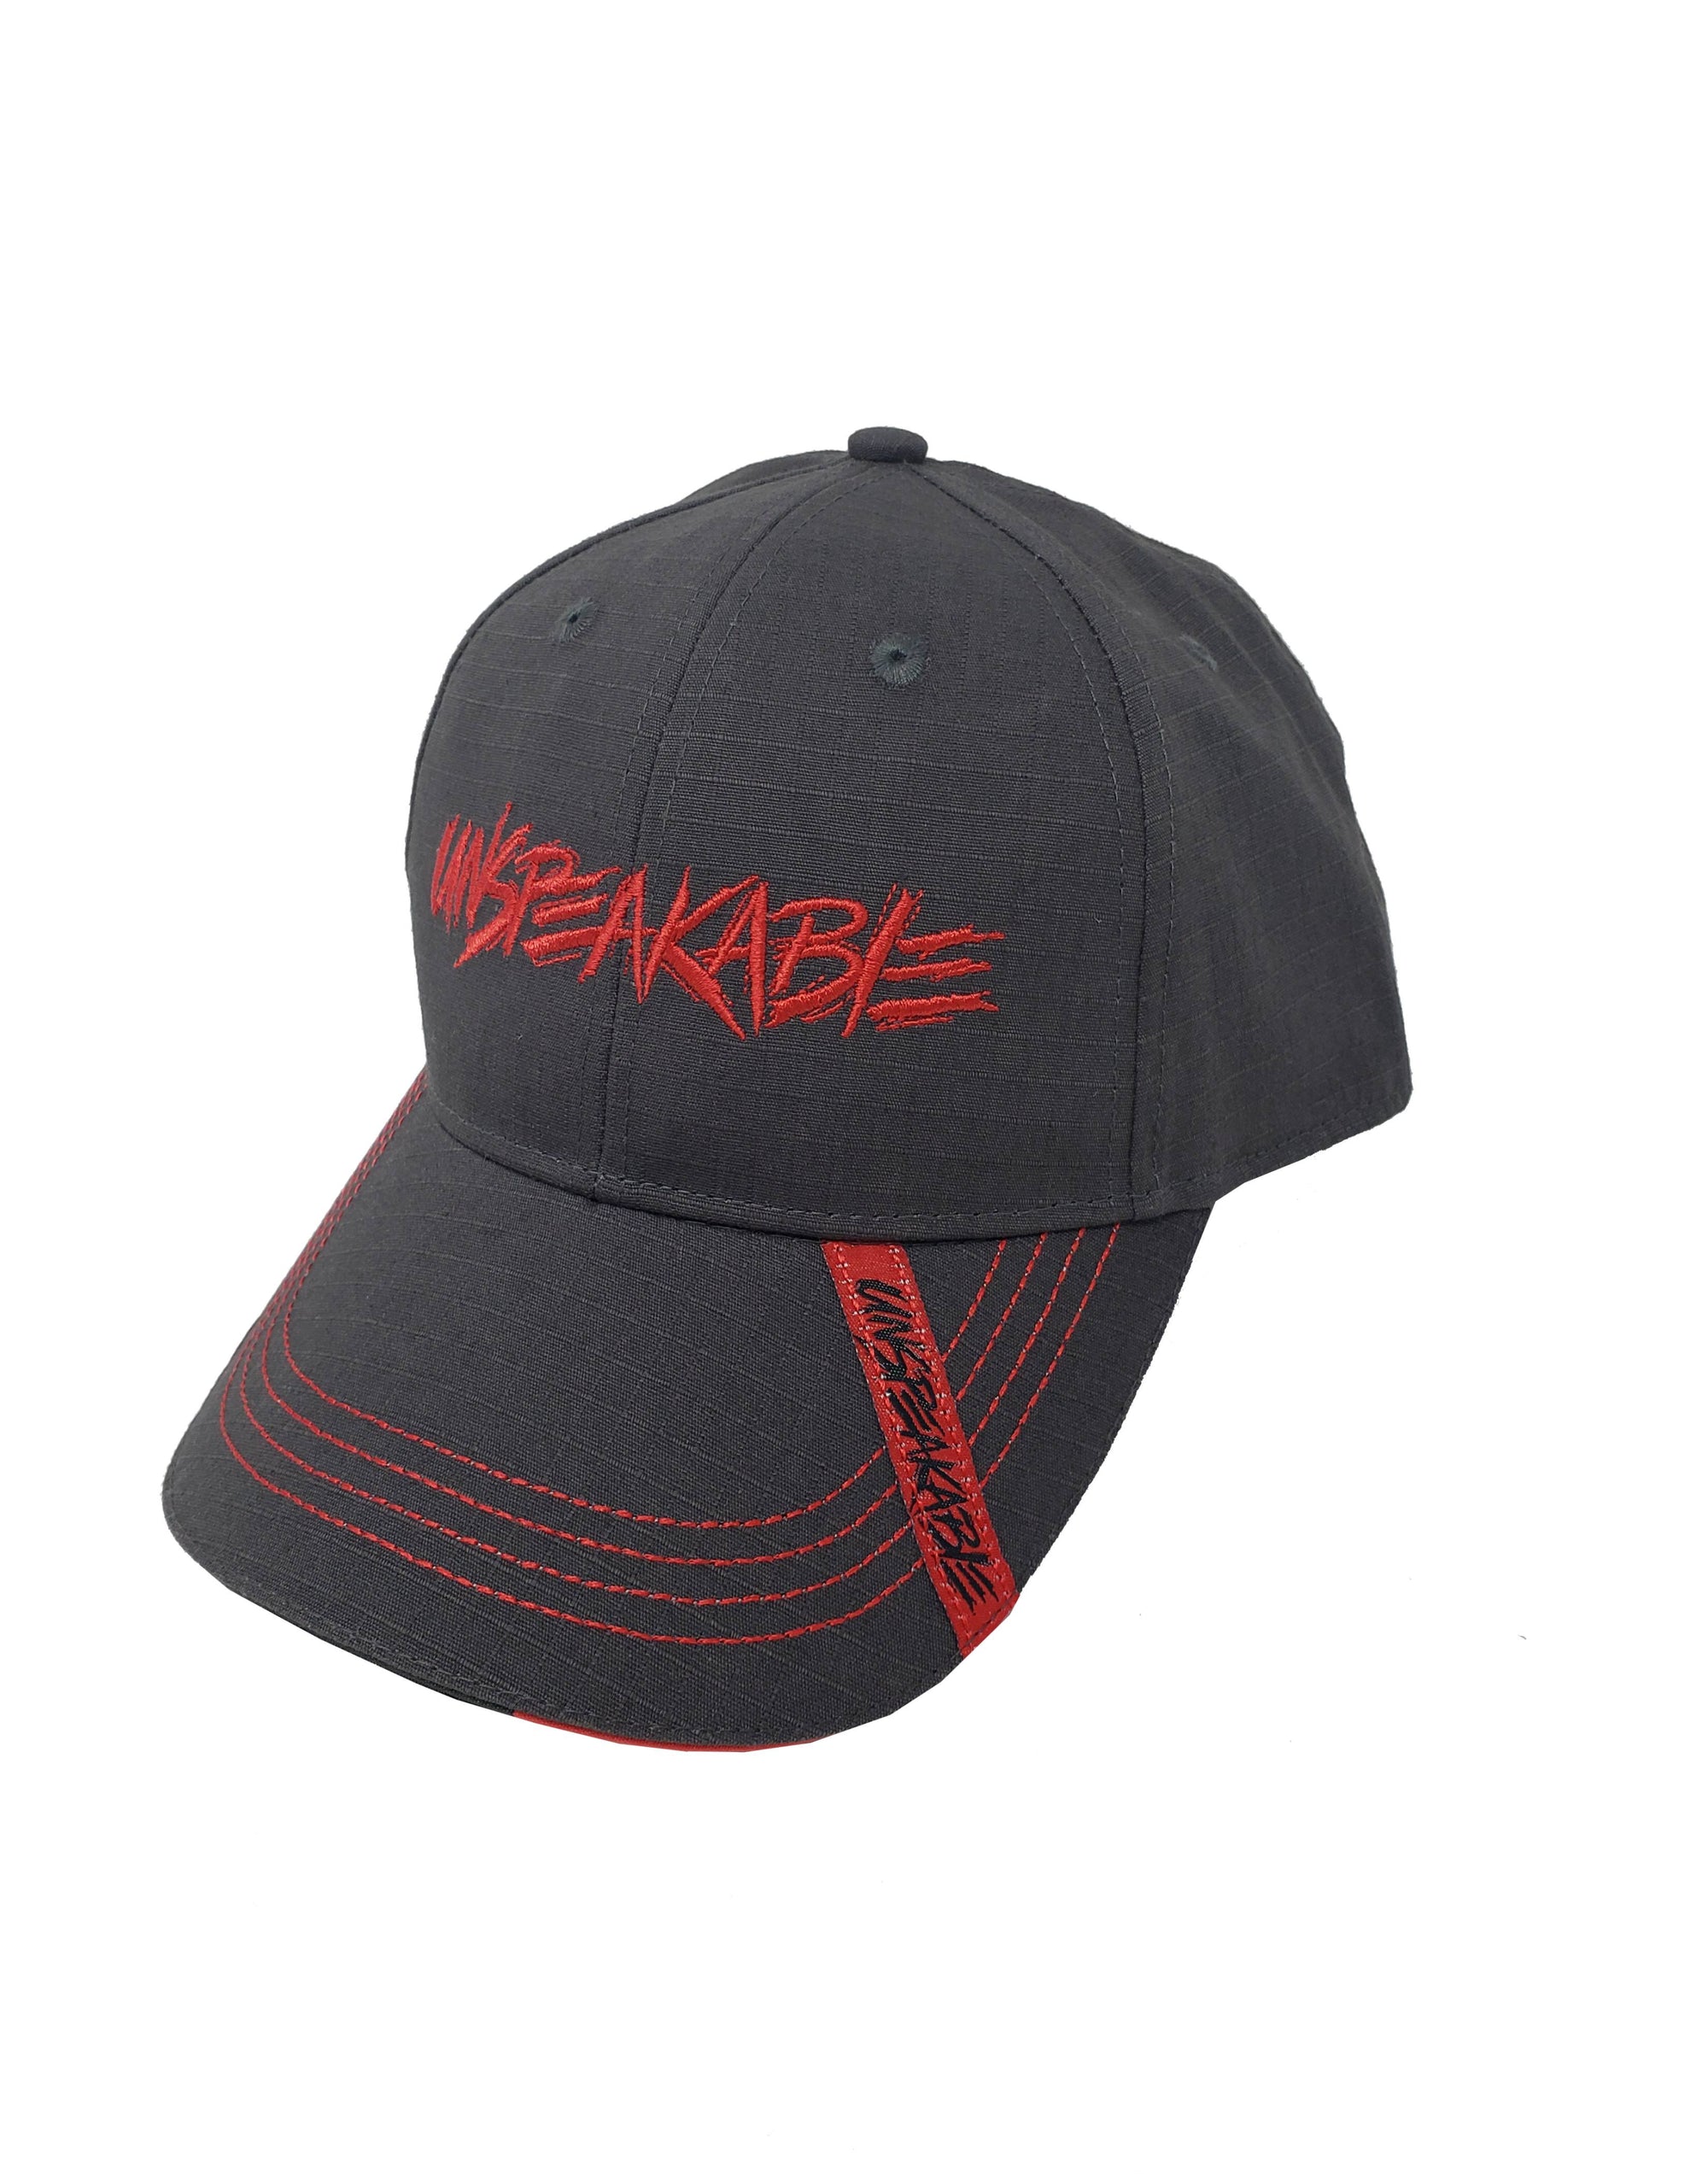 GREY CUSTOM HAT W/RED FONT & RED STITCHING - UnspeakableGaming